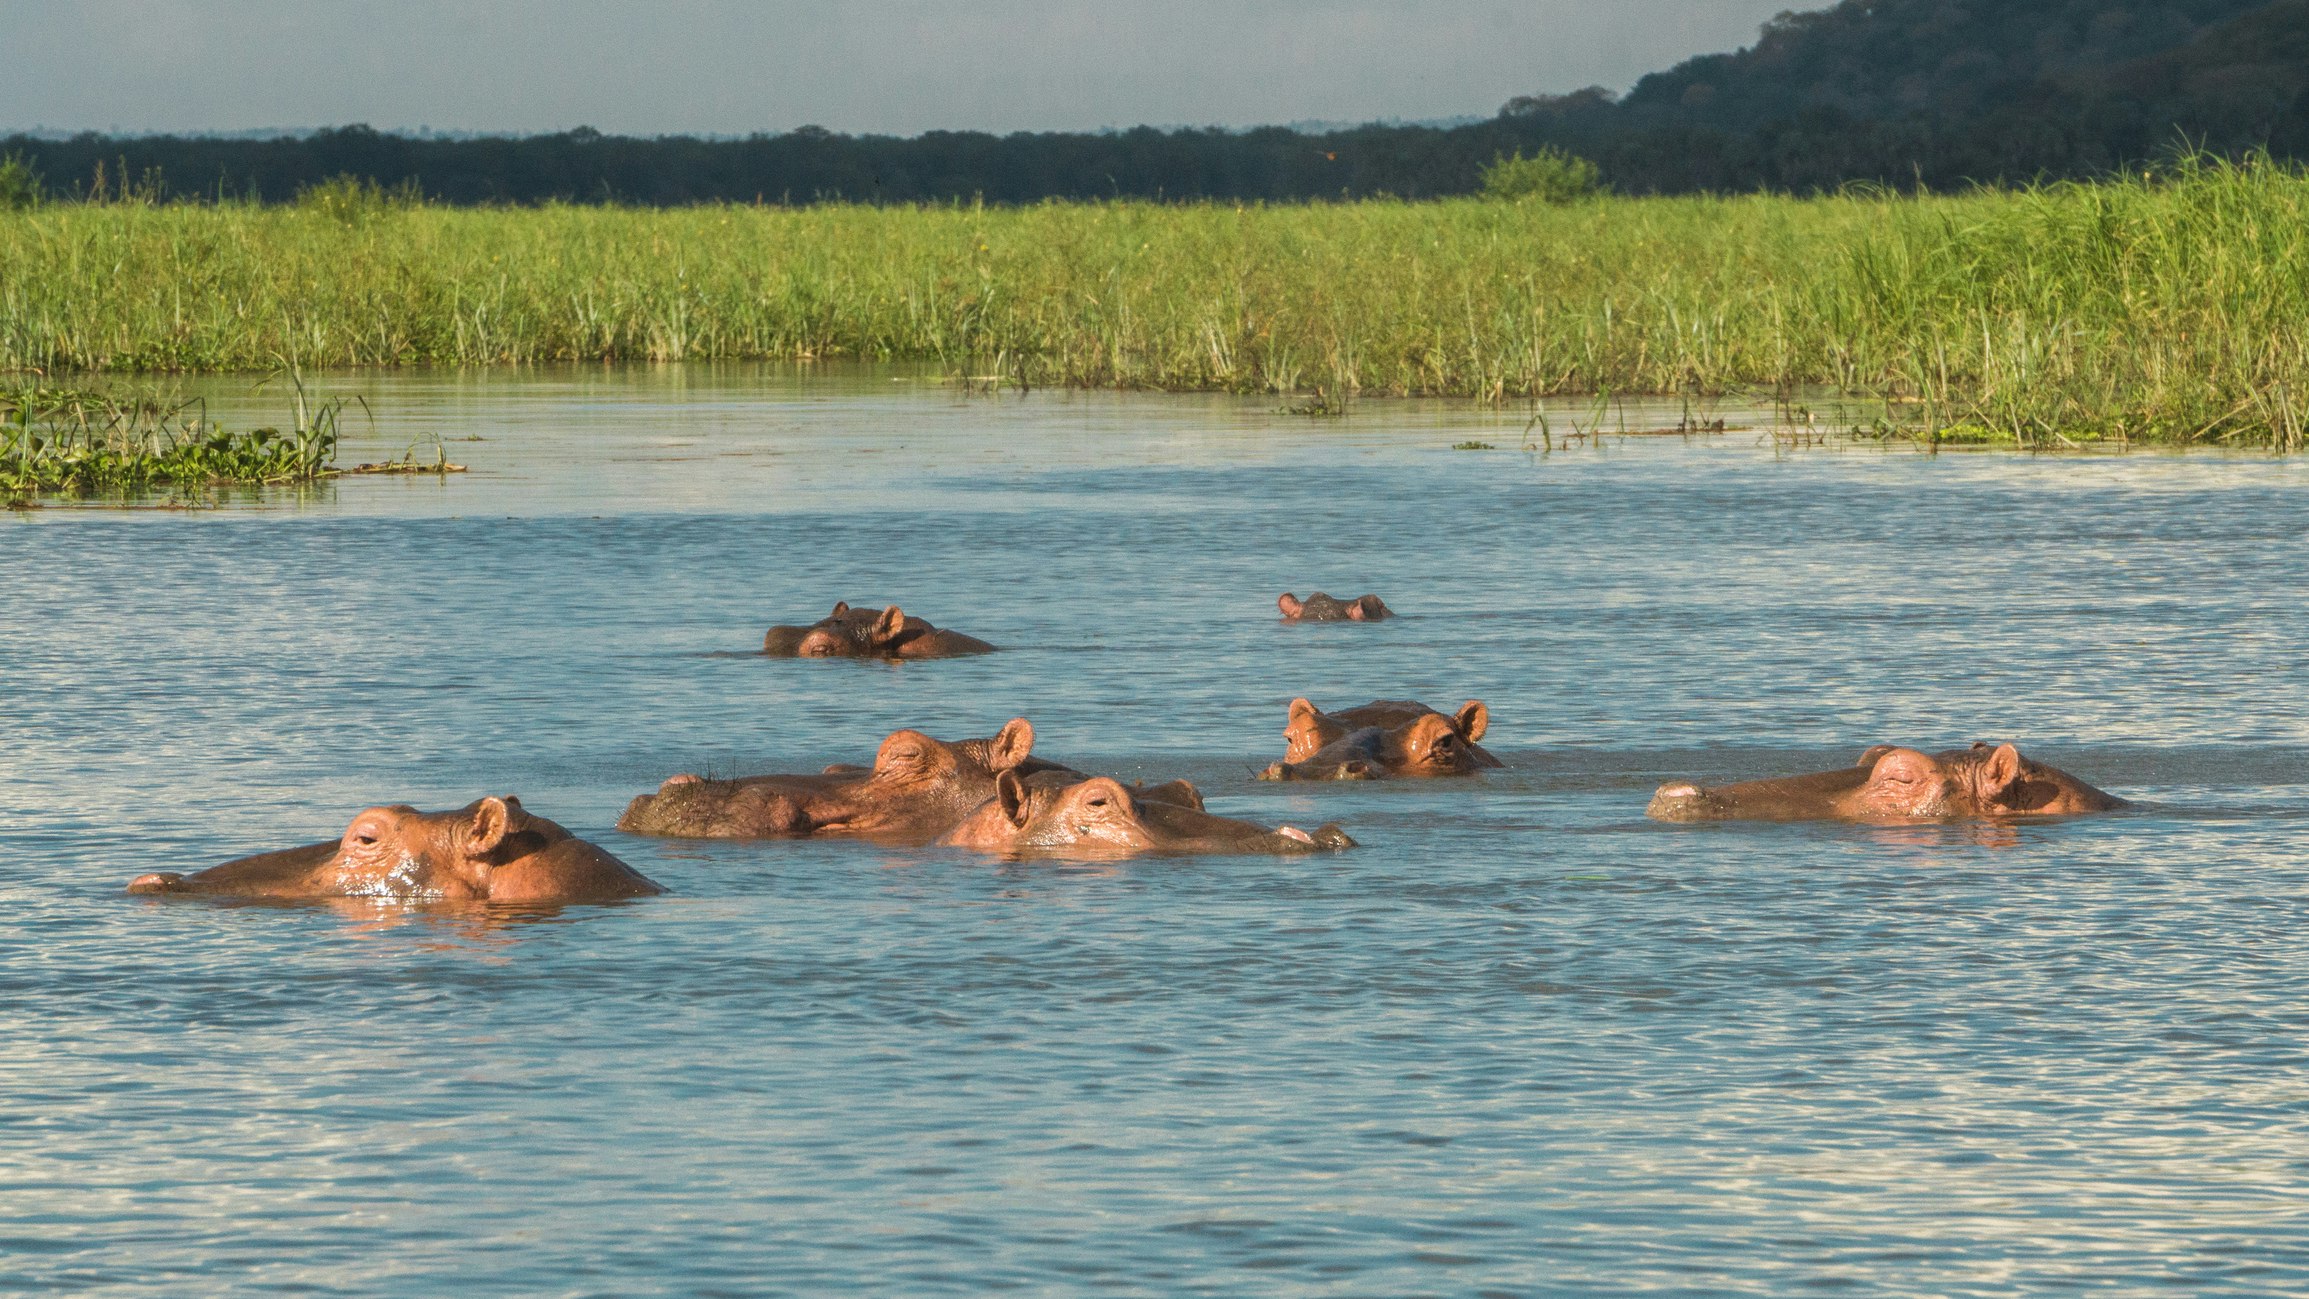 The ears and eyes of seven brown-and-pink hippos poke above the surface of a river in a wetland 